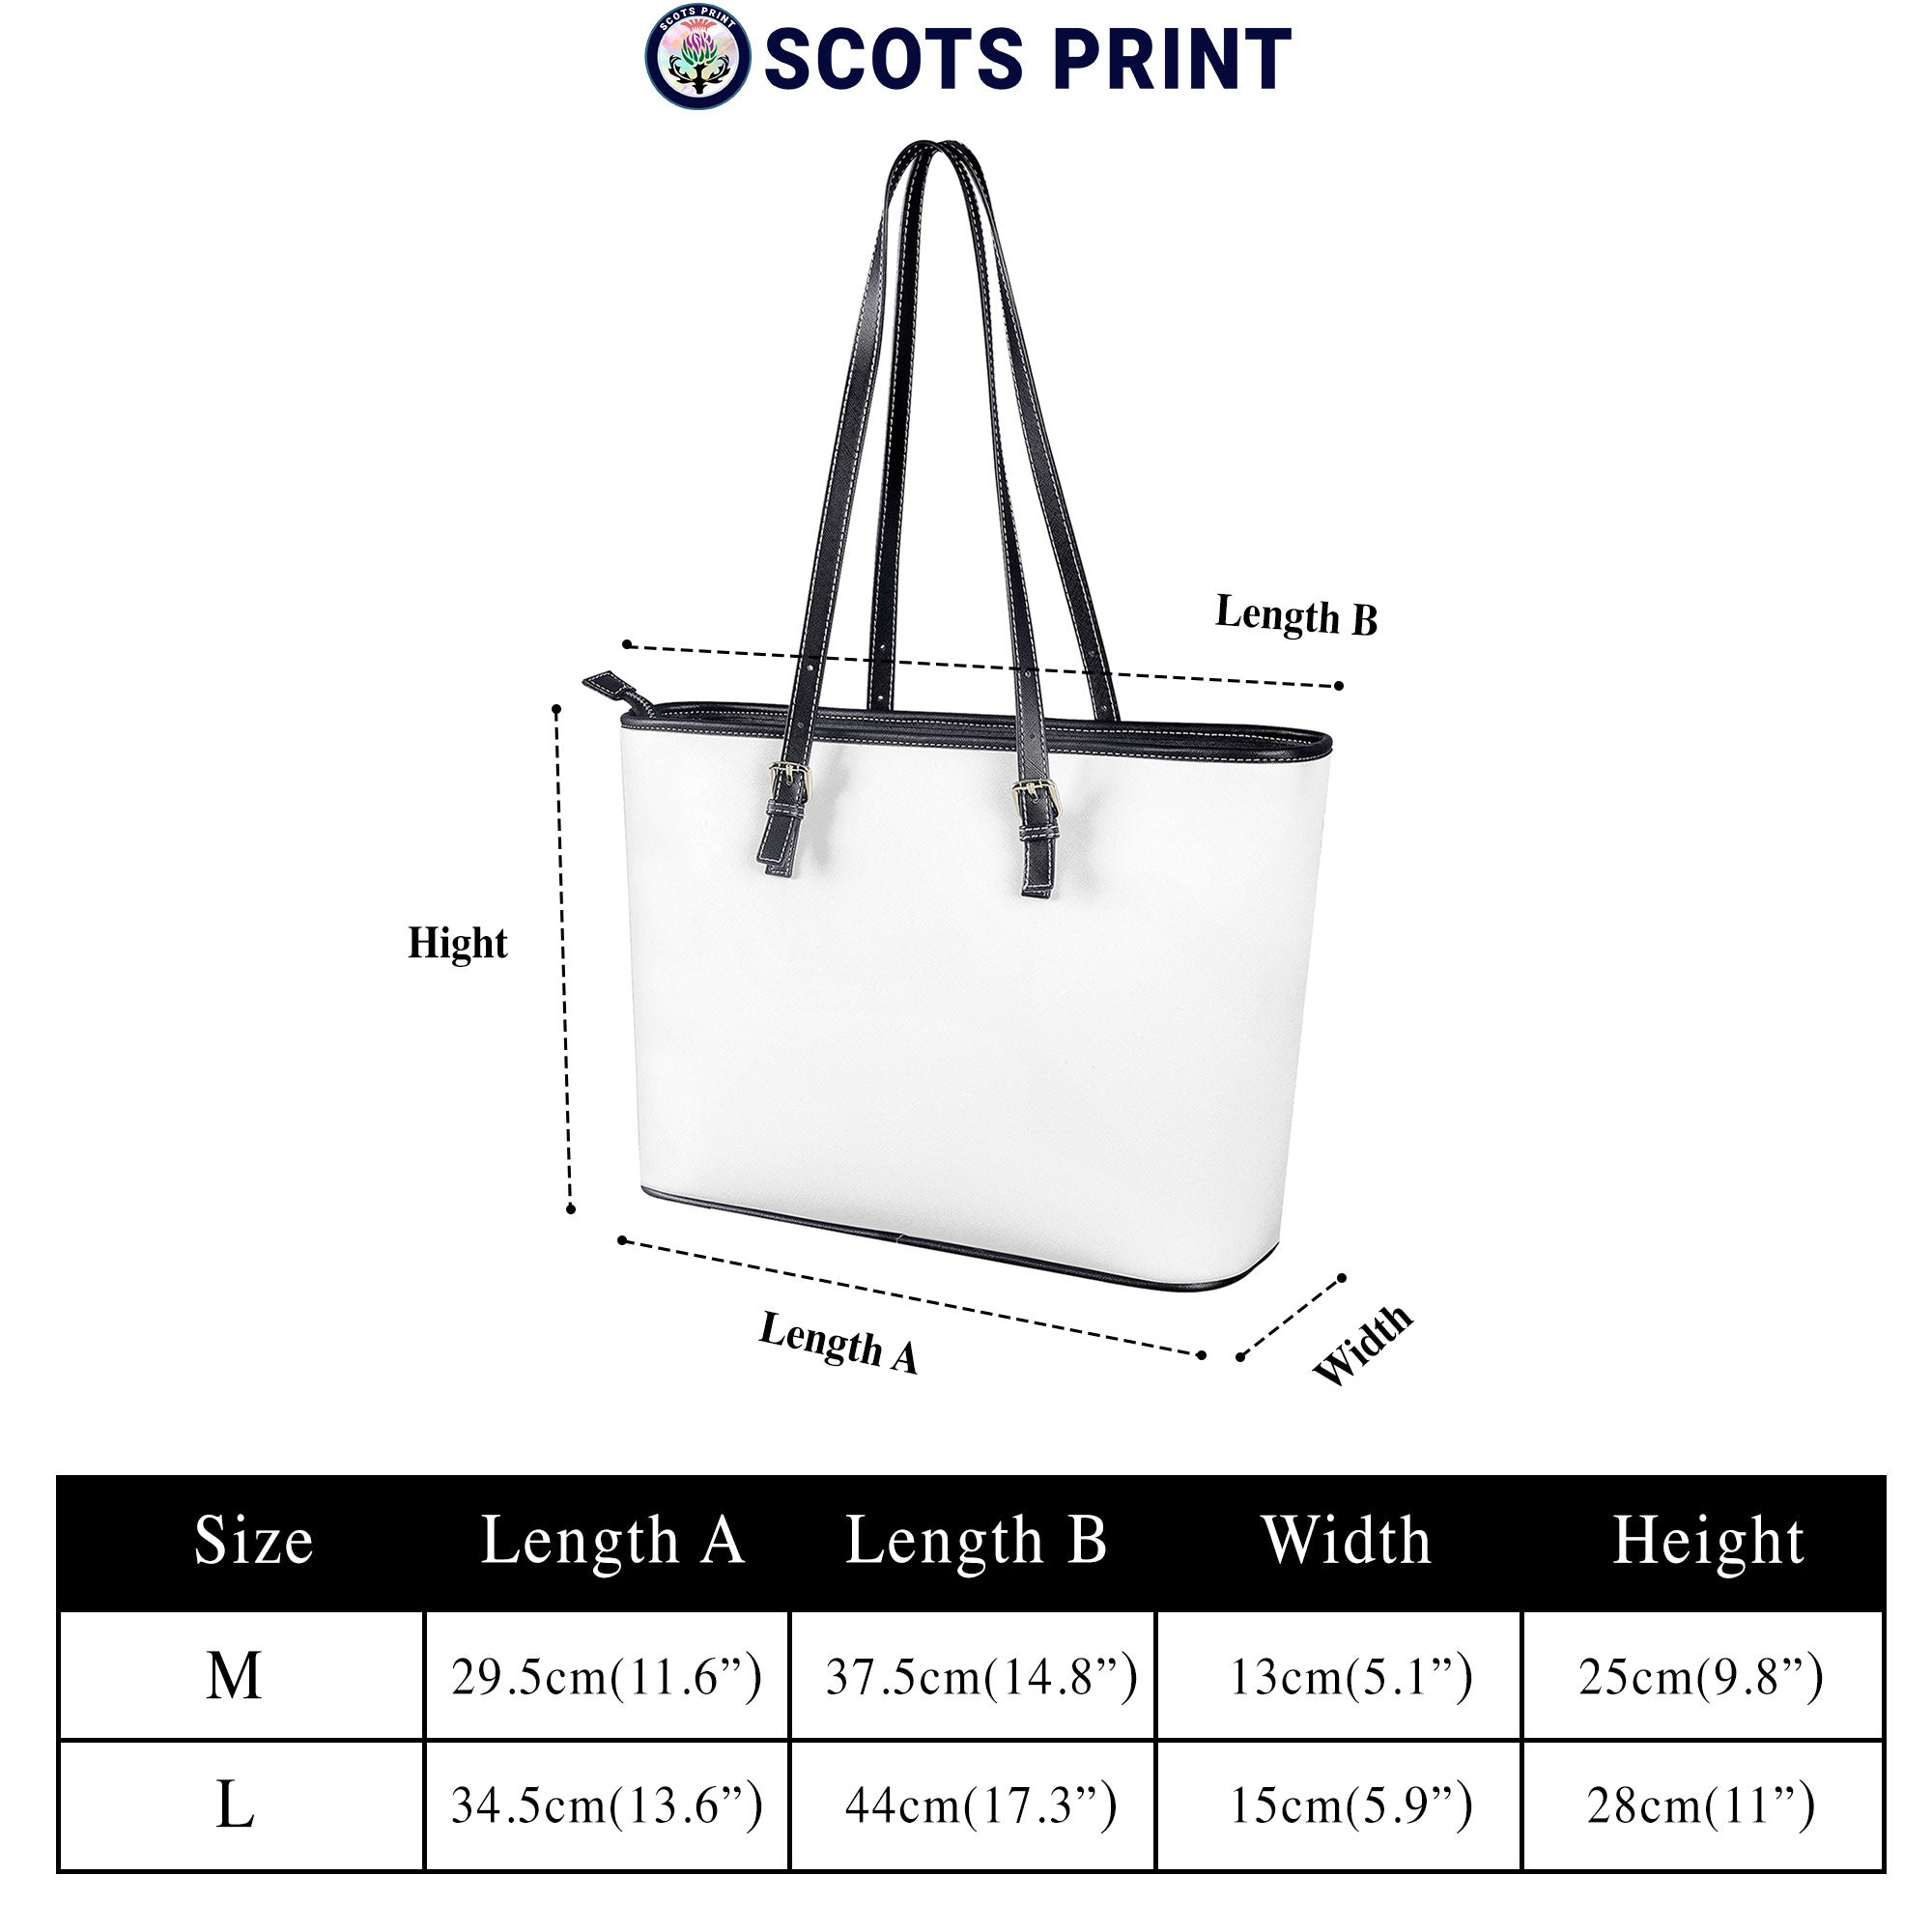 Hay Ancient Tartan Crest Leather Tote Bag